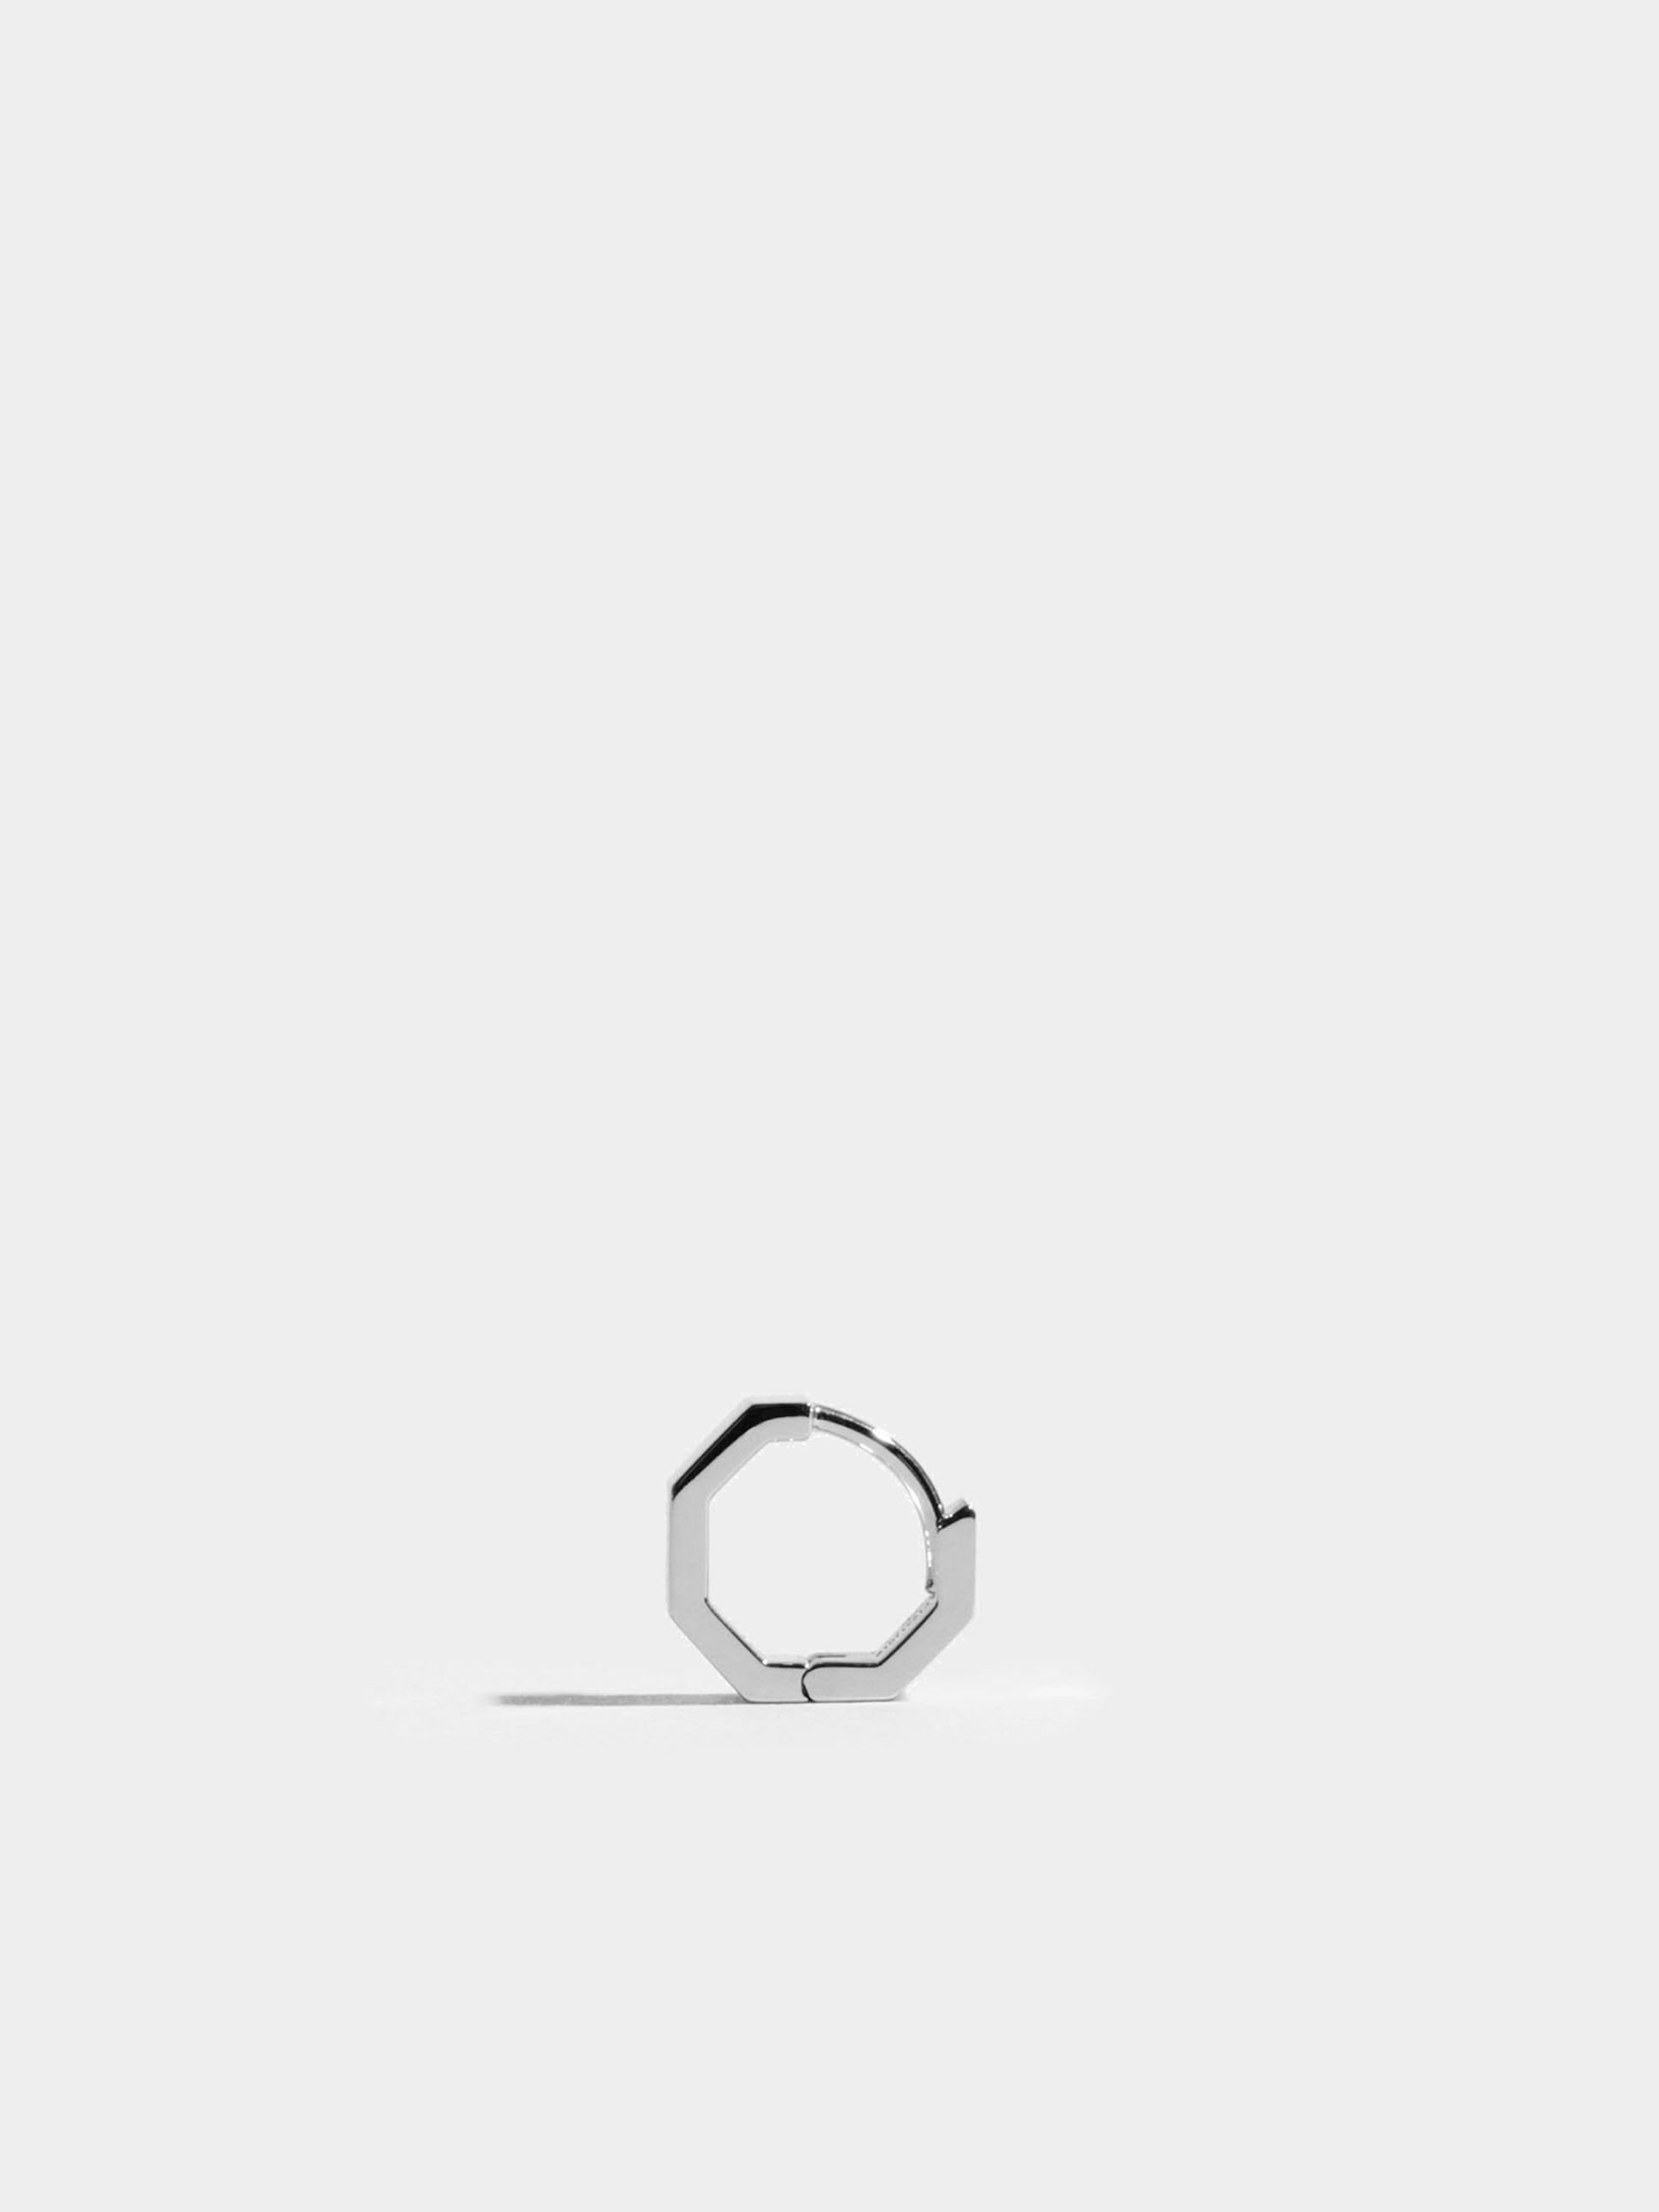 Octogone single-loop in 18k Fairmined ethical white gold, the unity.